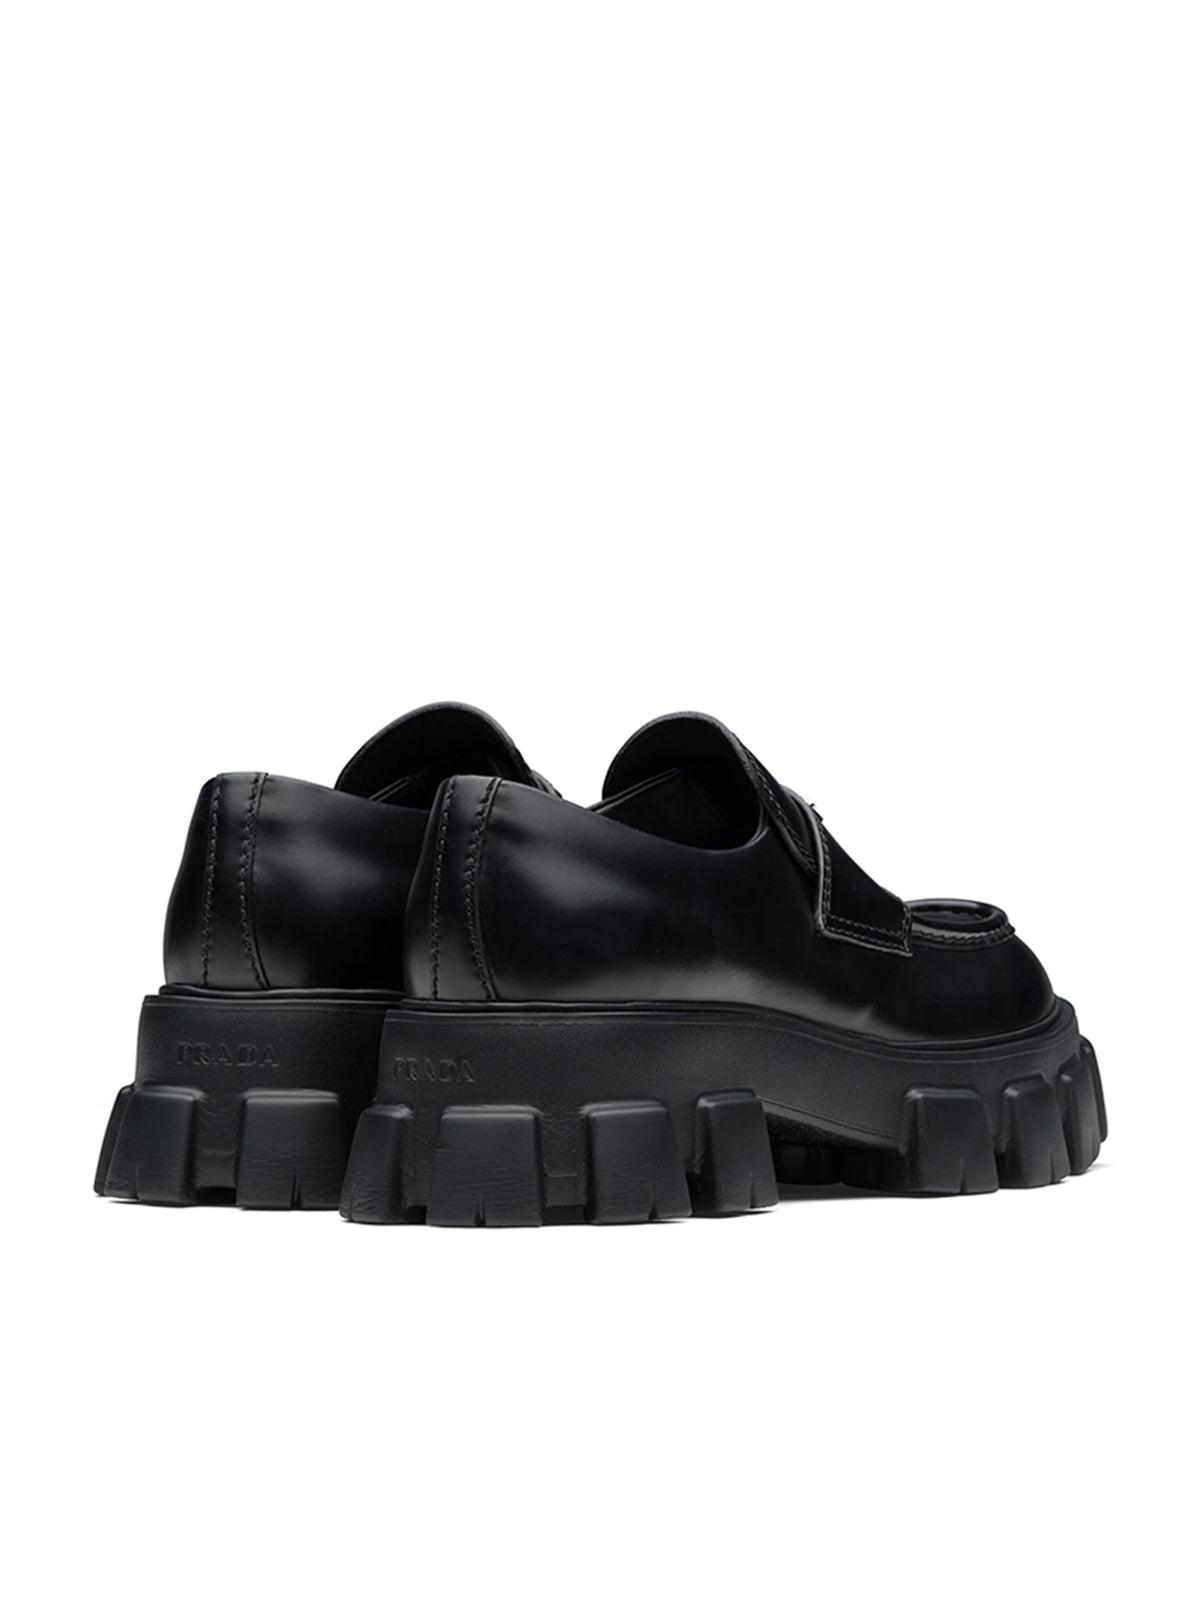 Prada Monolith Brushed Leather Loafers in Black for Men | Lyst